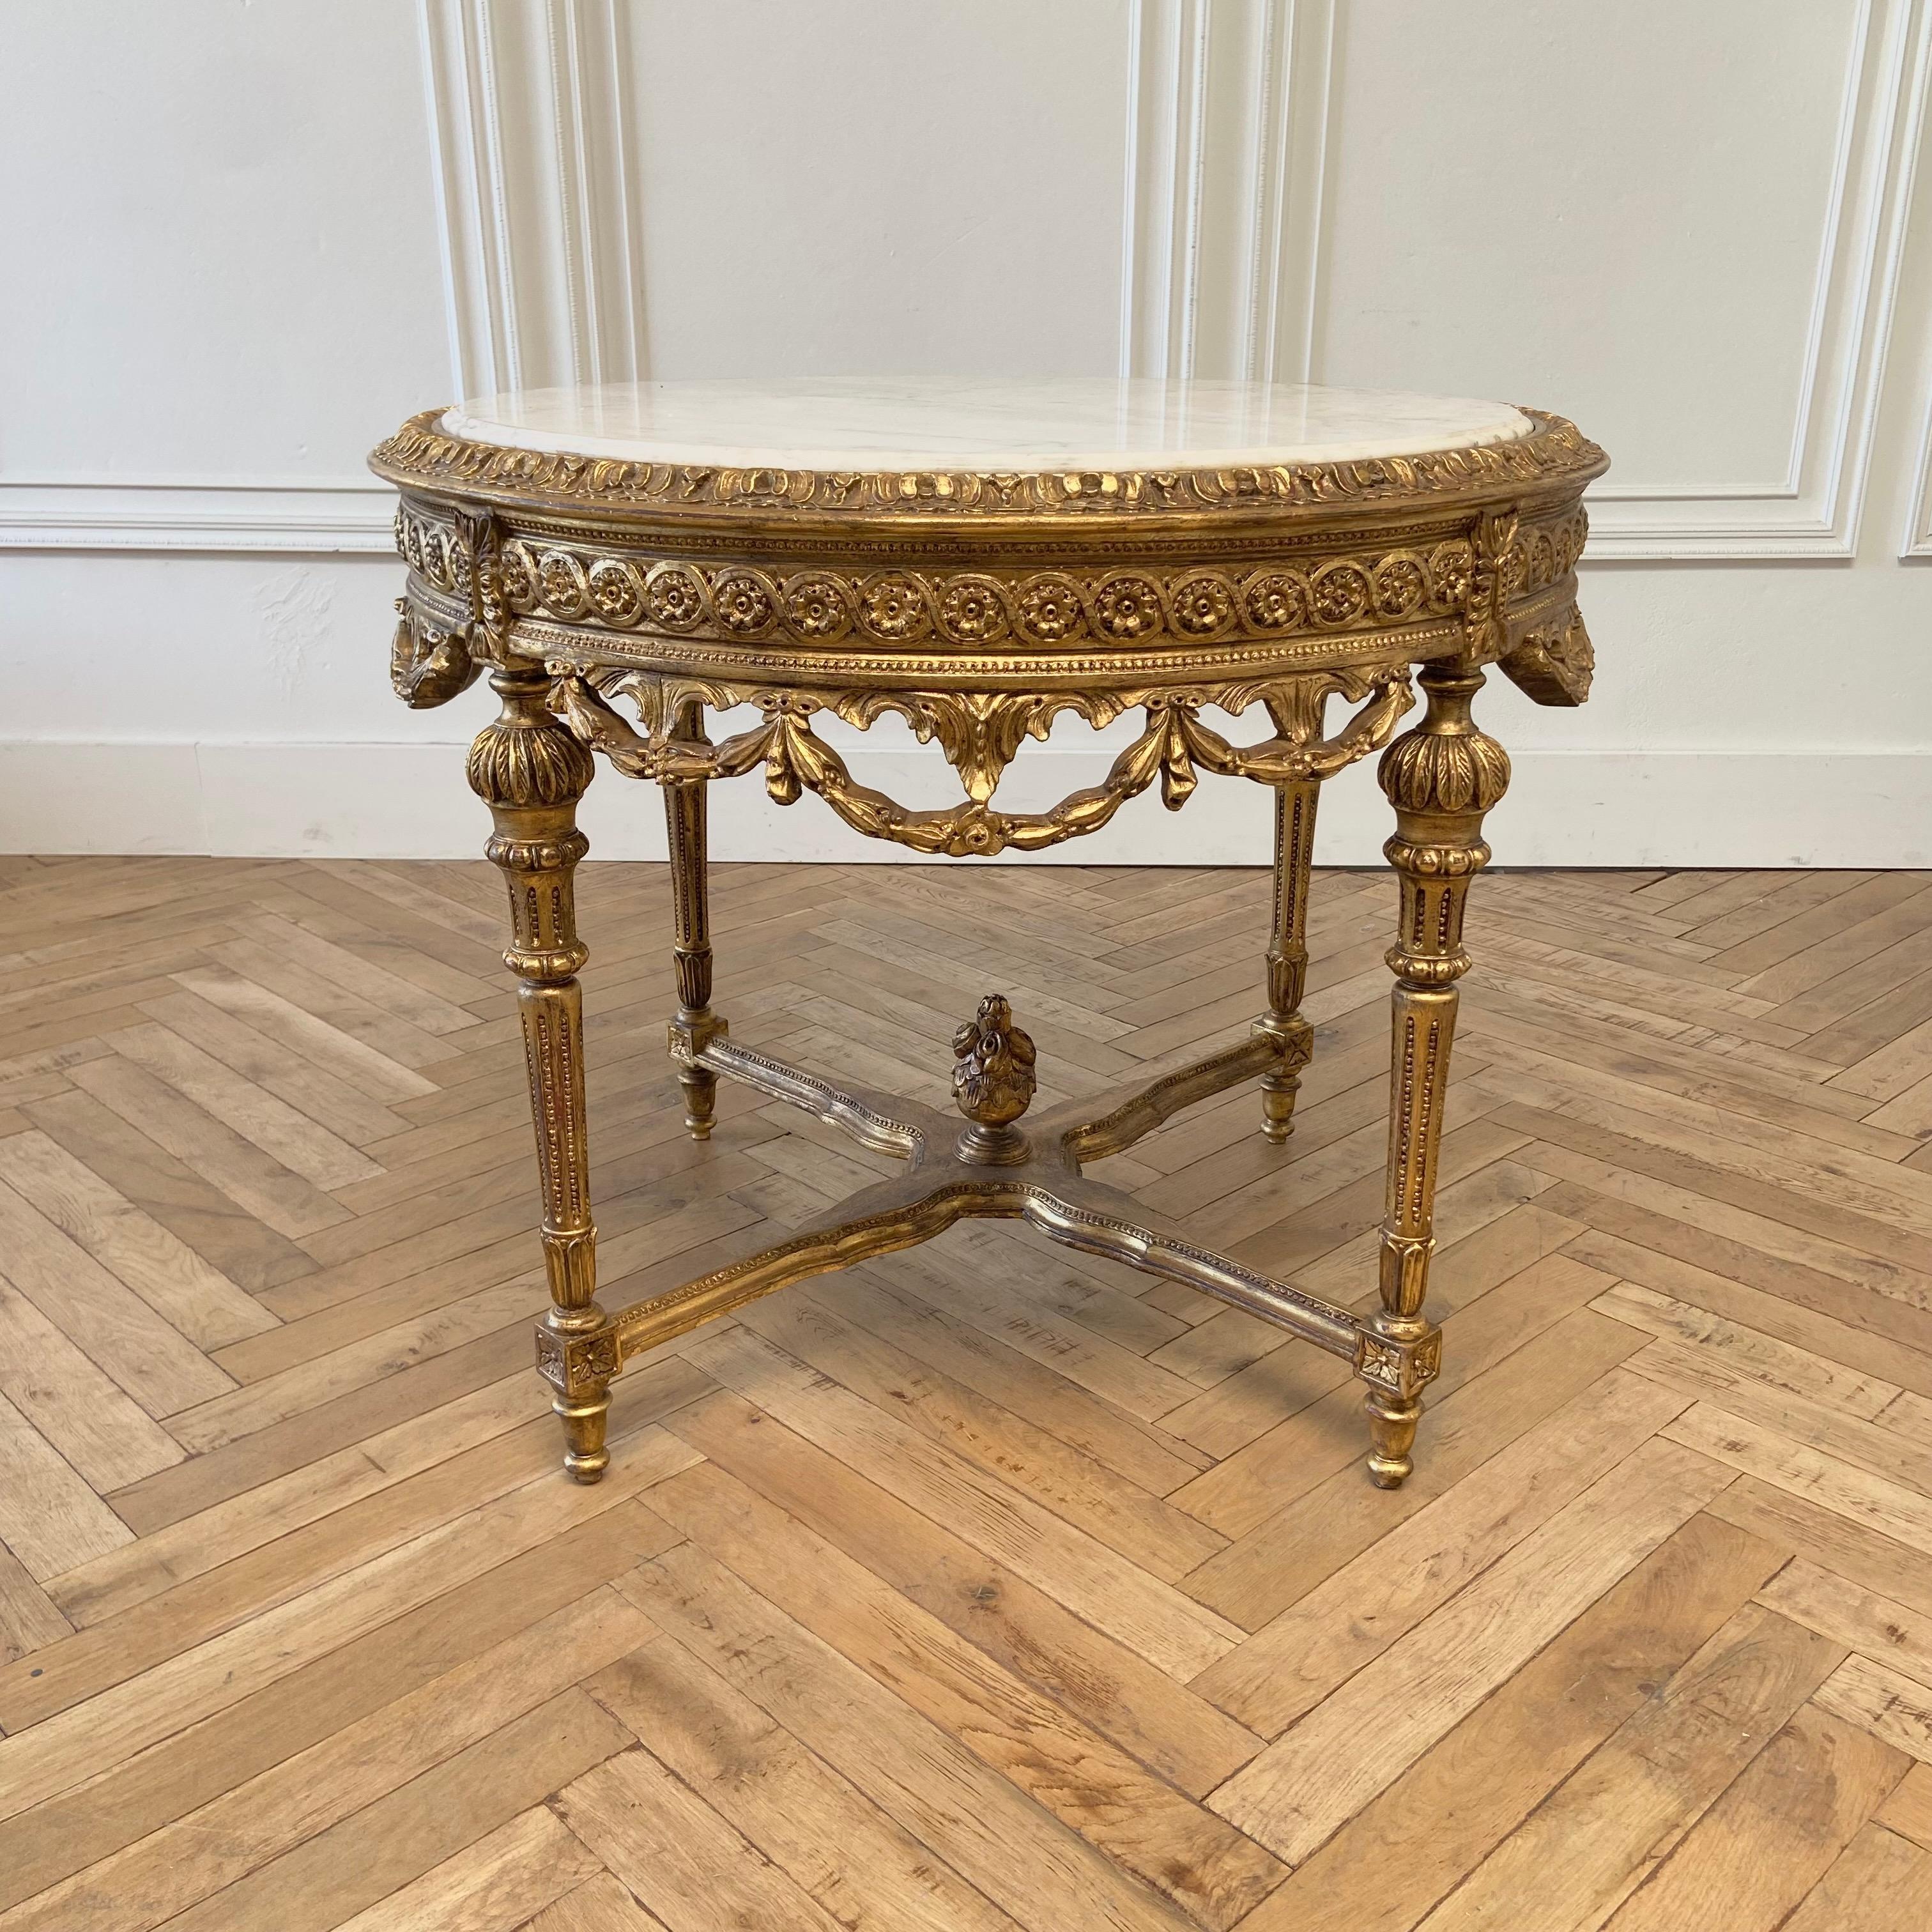 20th century round gilt wood center table with white marble top
Size:
40” rd. X 32”h
This table is a vintage reproduction of an antique Louis XVI Style, it is a gilt wood finish, with solid strong construction. The white marble top has grey and